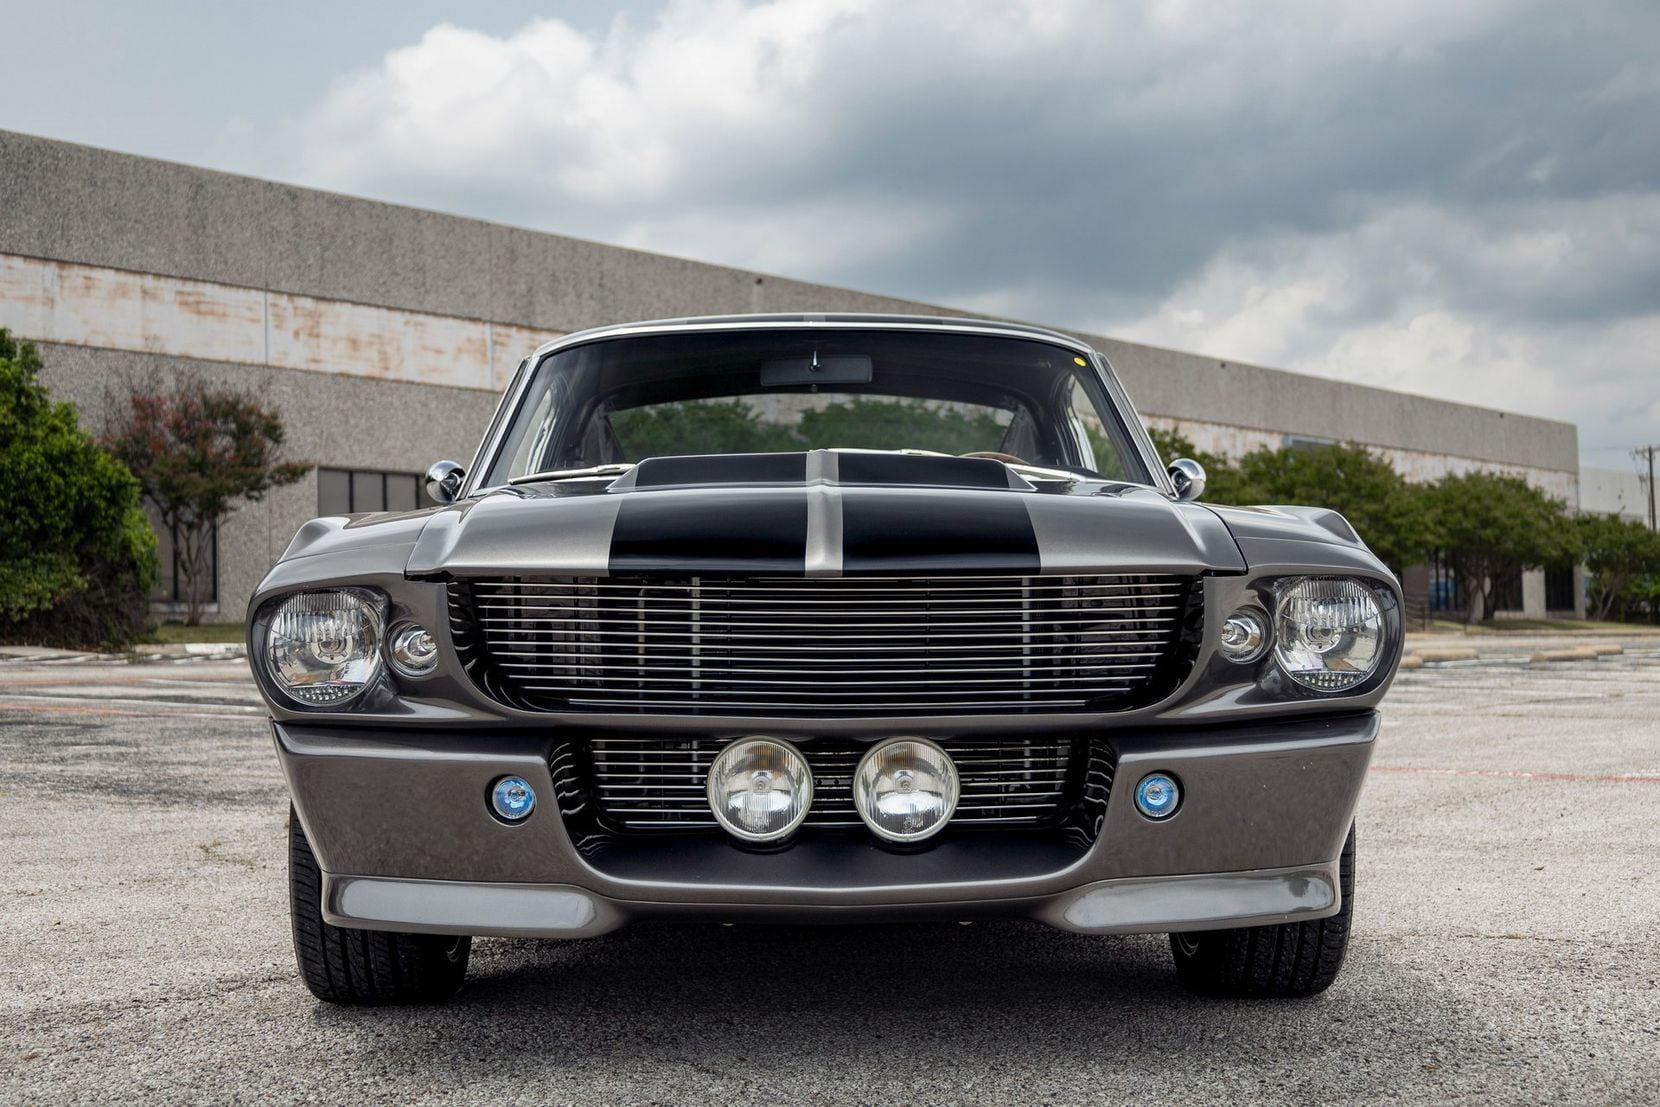 The building buyer can opt to include a Mustang Shelby GT500 Eleanor, made famous by the...